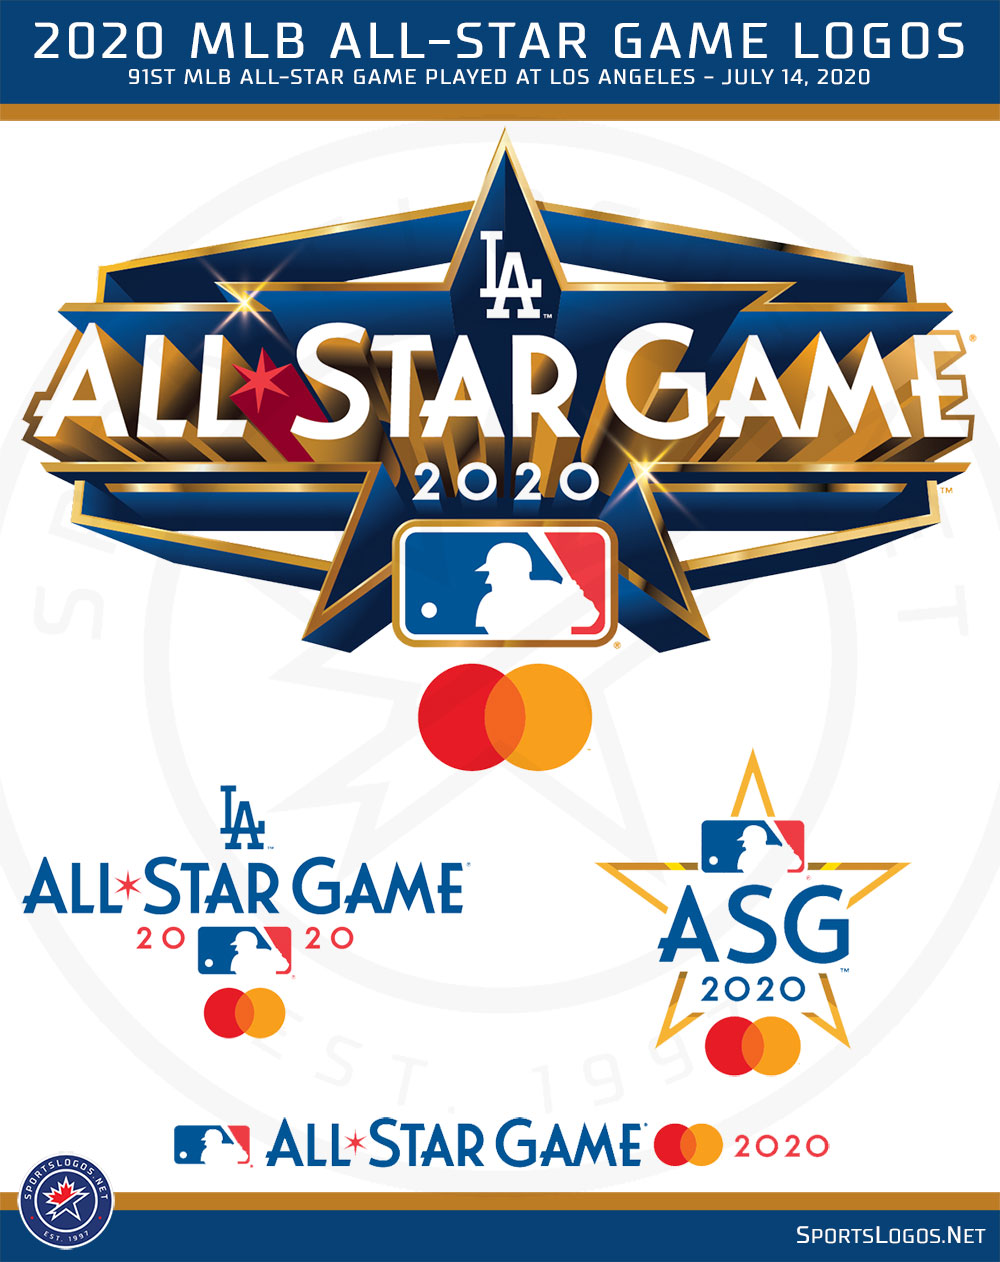 2020 MLB AllStar Game Logo Unveiled in Los Angeles News